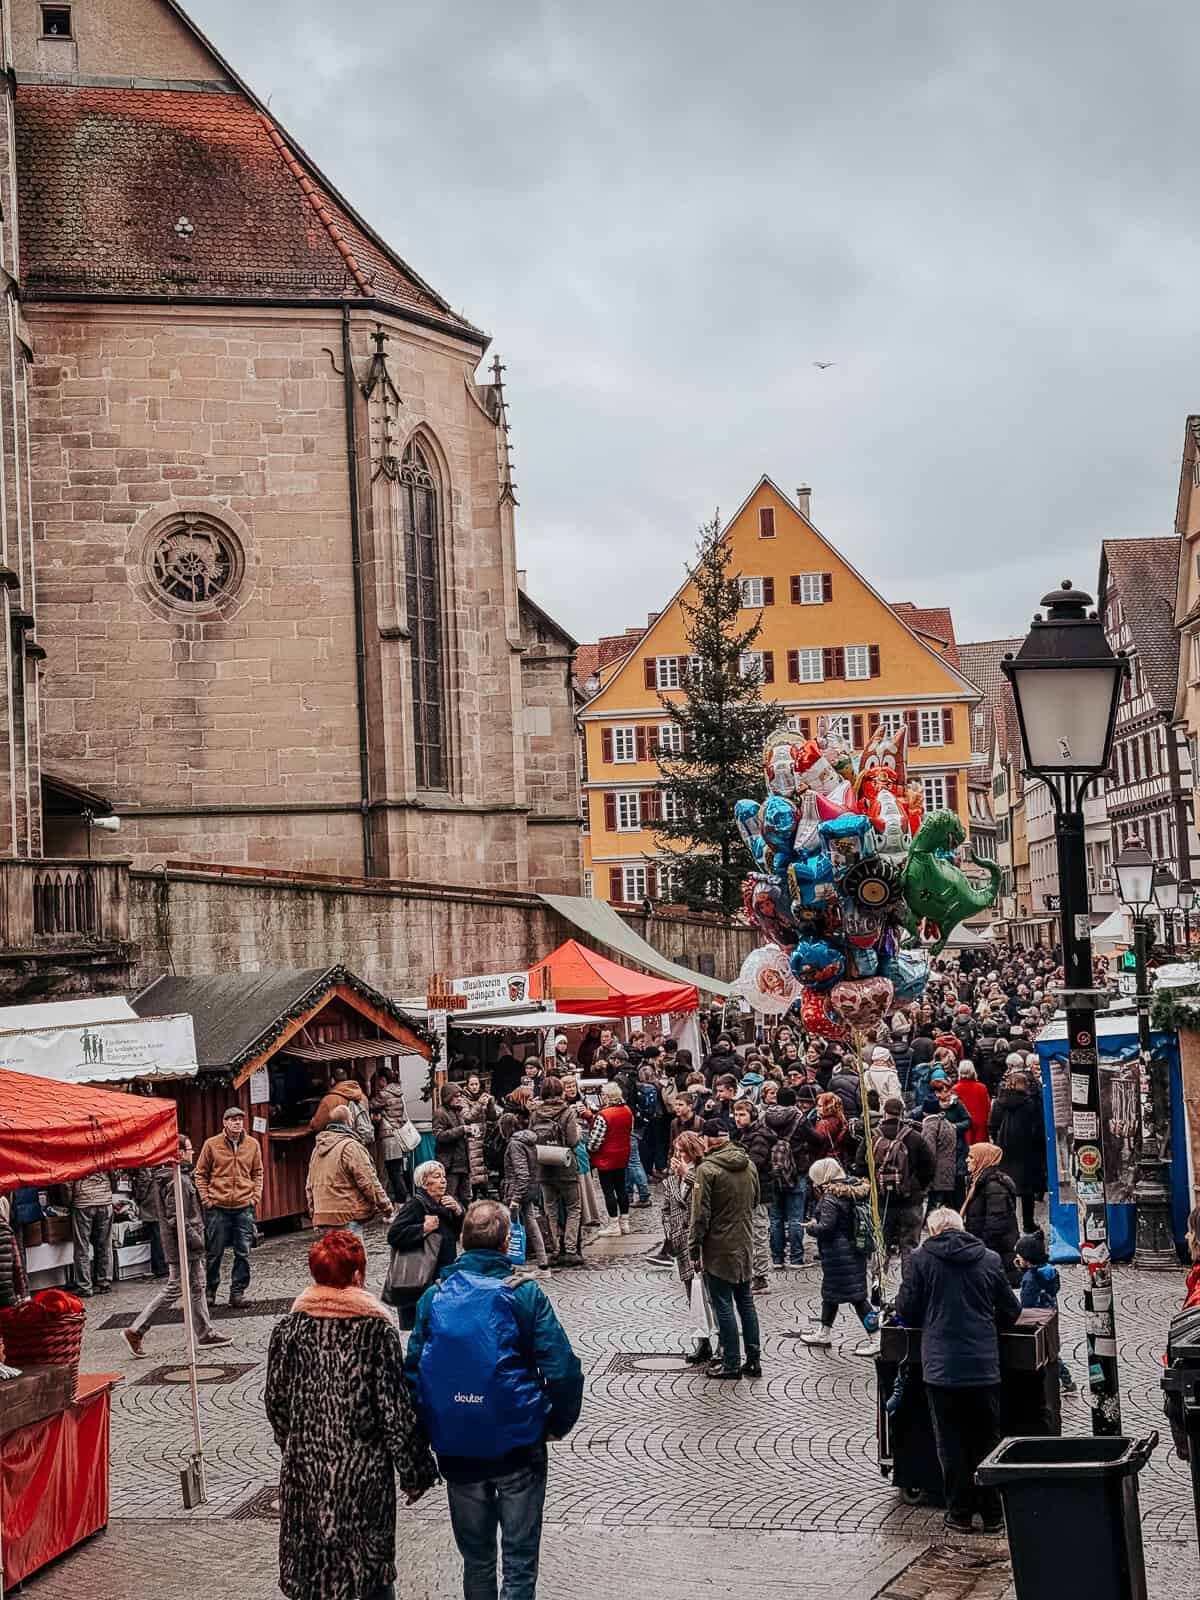 Crowded market square in Tübingen next to a large Gothic church, featuring vendors, shoppers, and colorful balloons, under an overcast sky.